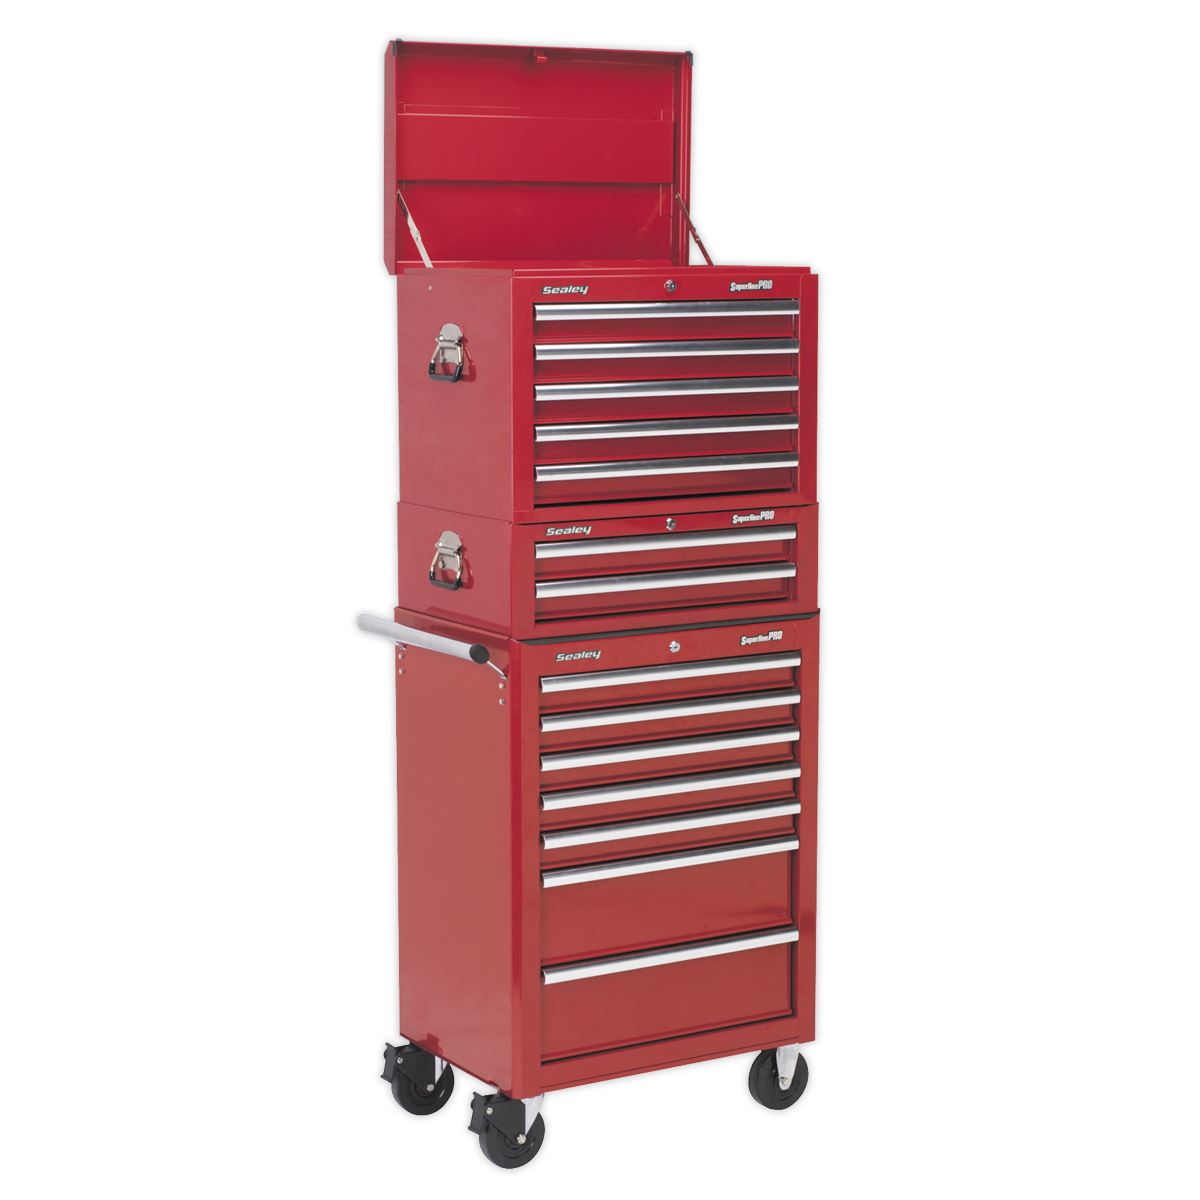 Sealey Superline Pro Topchest, Mid-Box Tool Chest & Rollcab Combination 14 Drawer with Ball-Bearing Slides - Red